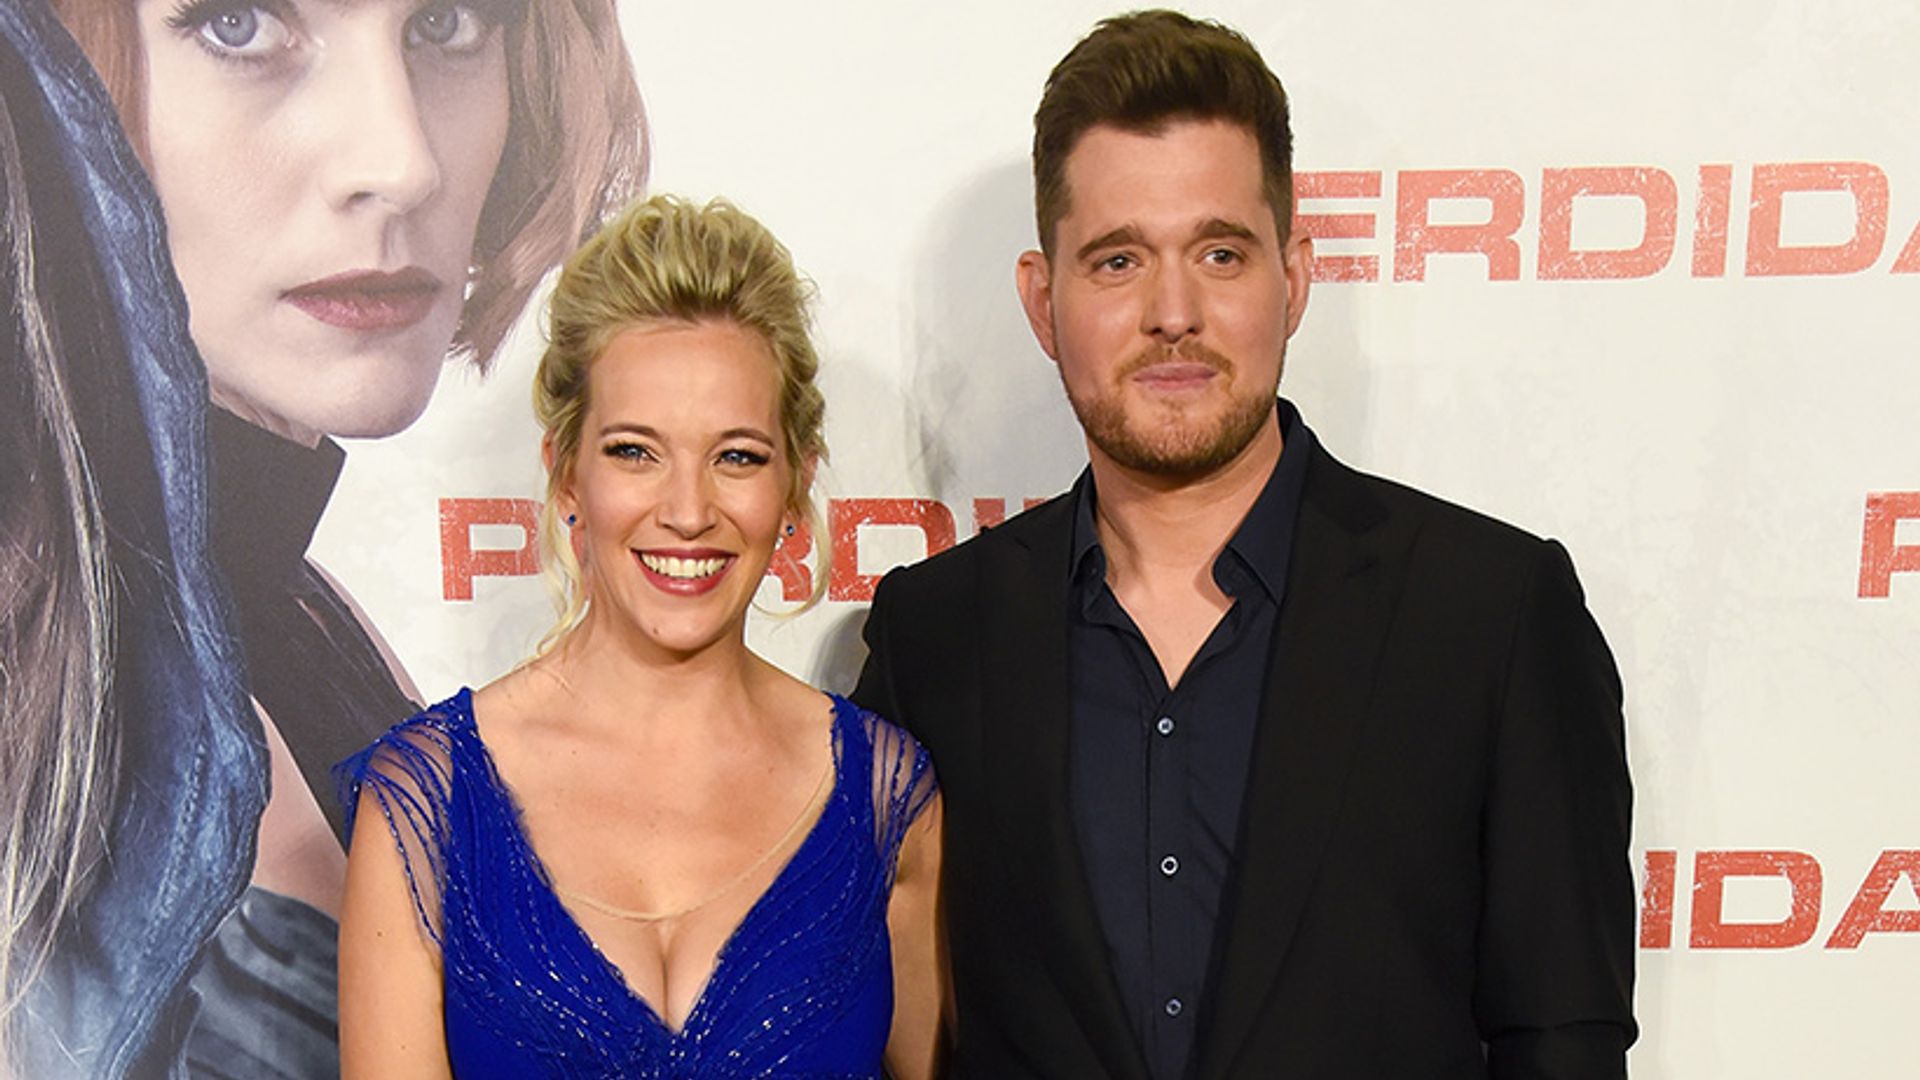 Michael Bublé confirms gender of third baby with wife Luisana Lopilato